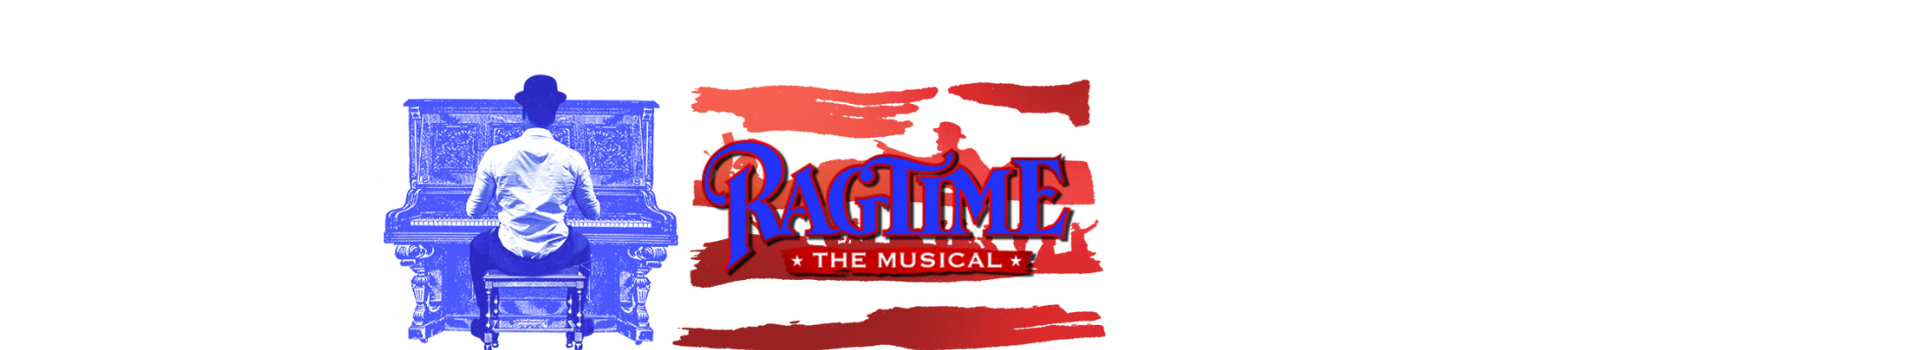 Ragtime tickets London Charing Cross Theatre